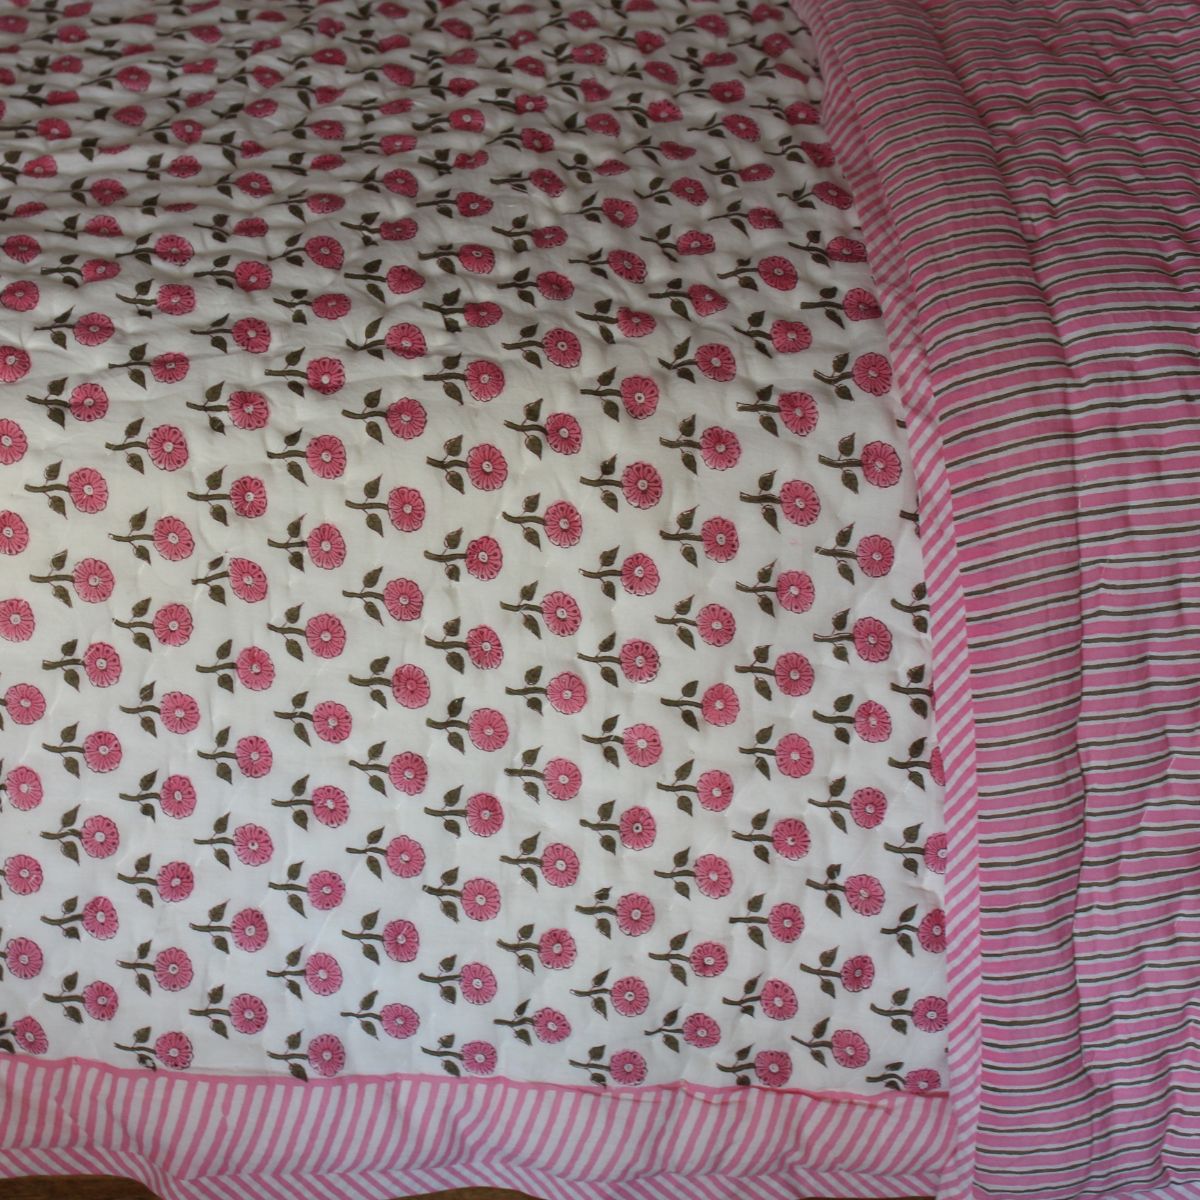 Serenity Pink reversible cotton quilt- King and Queen